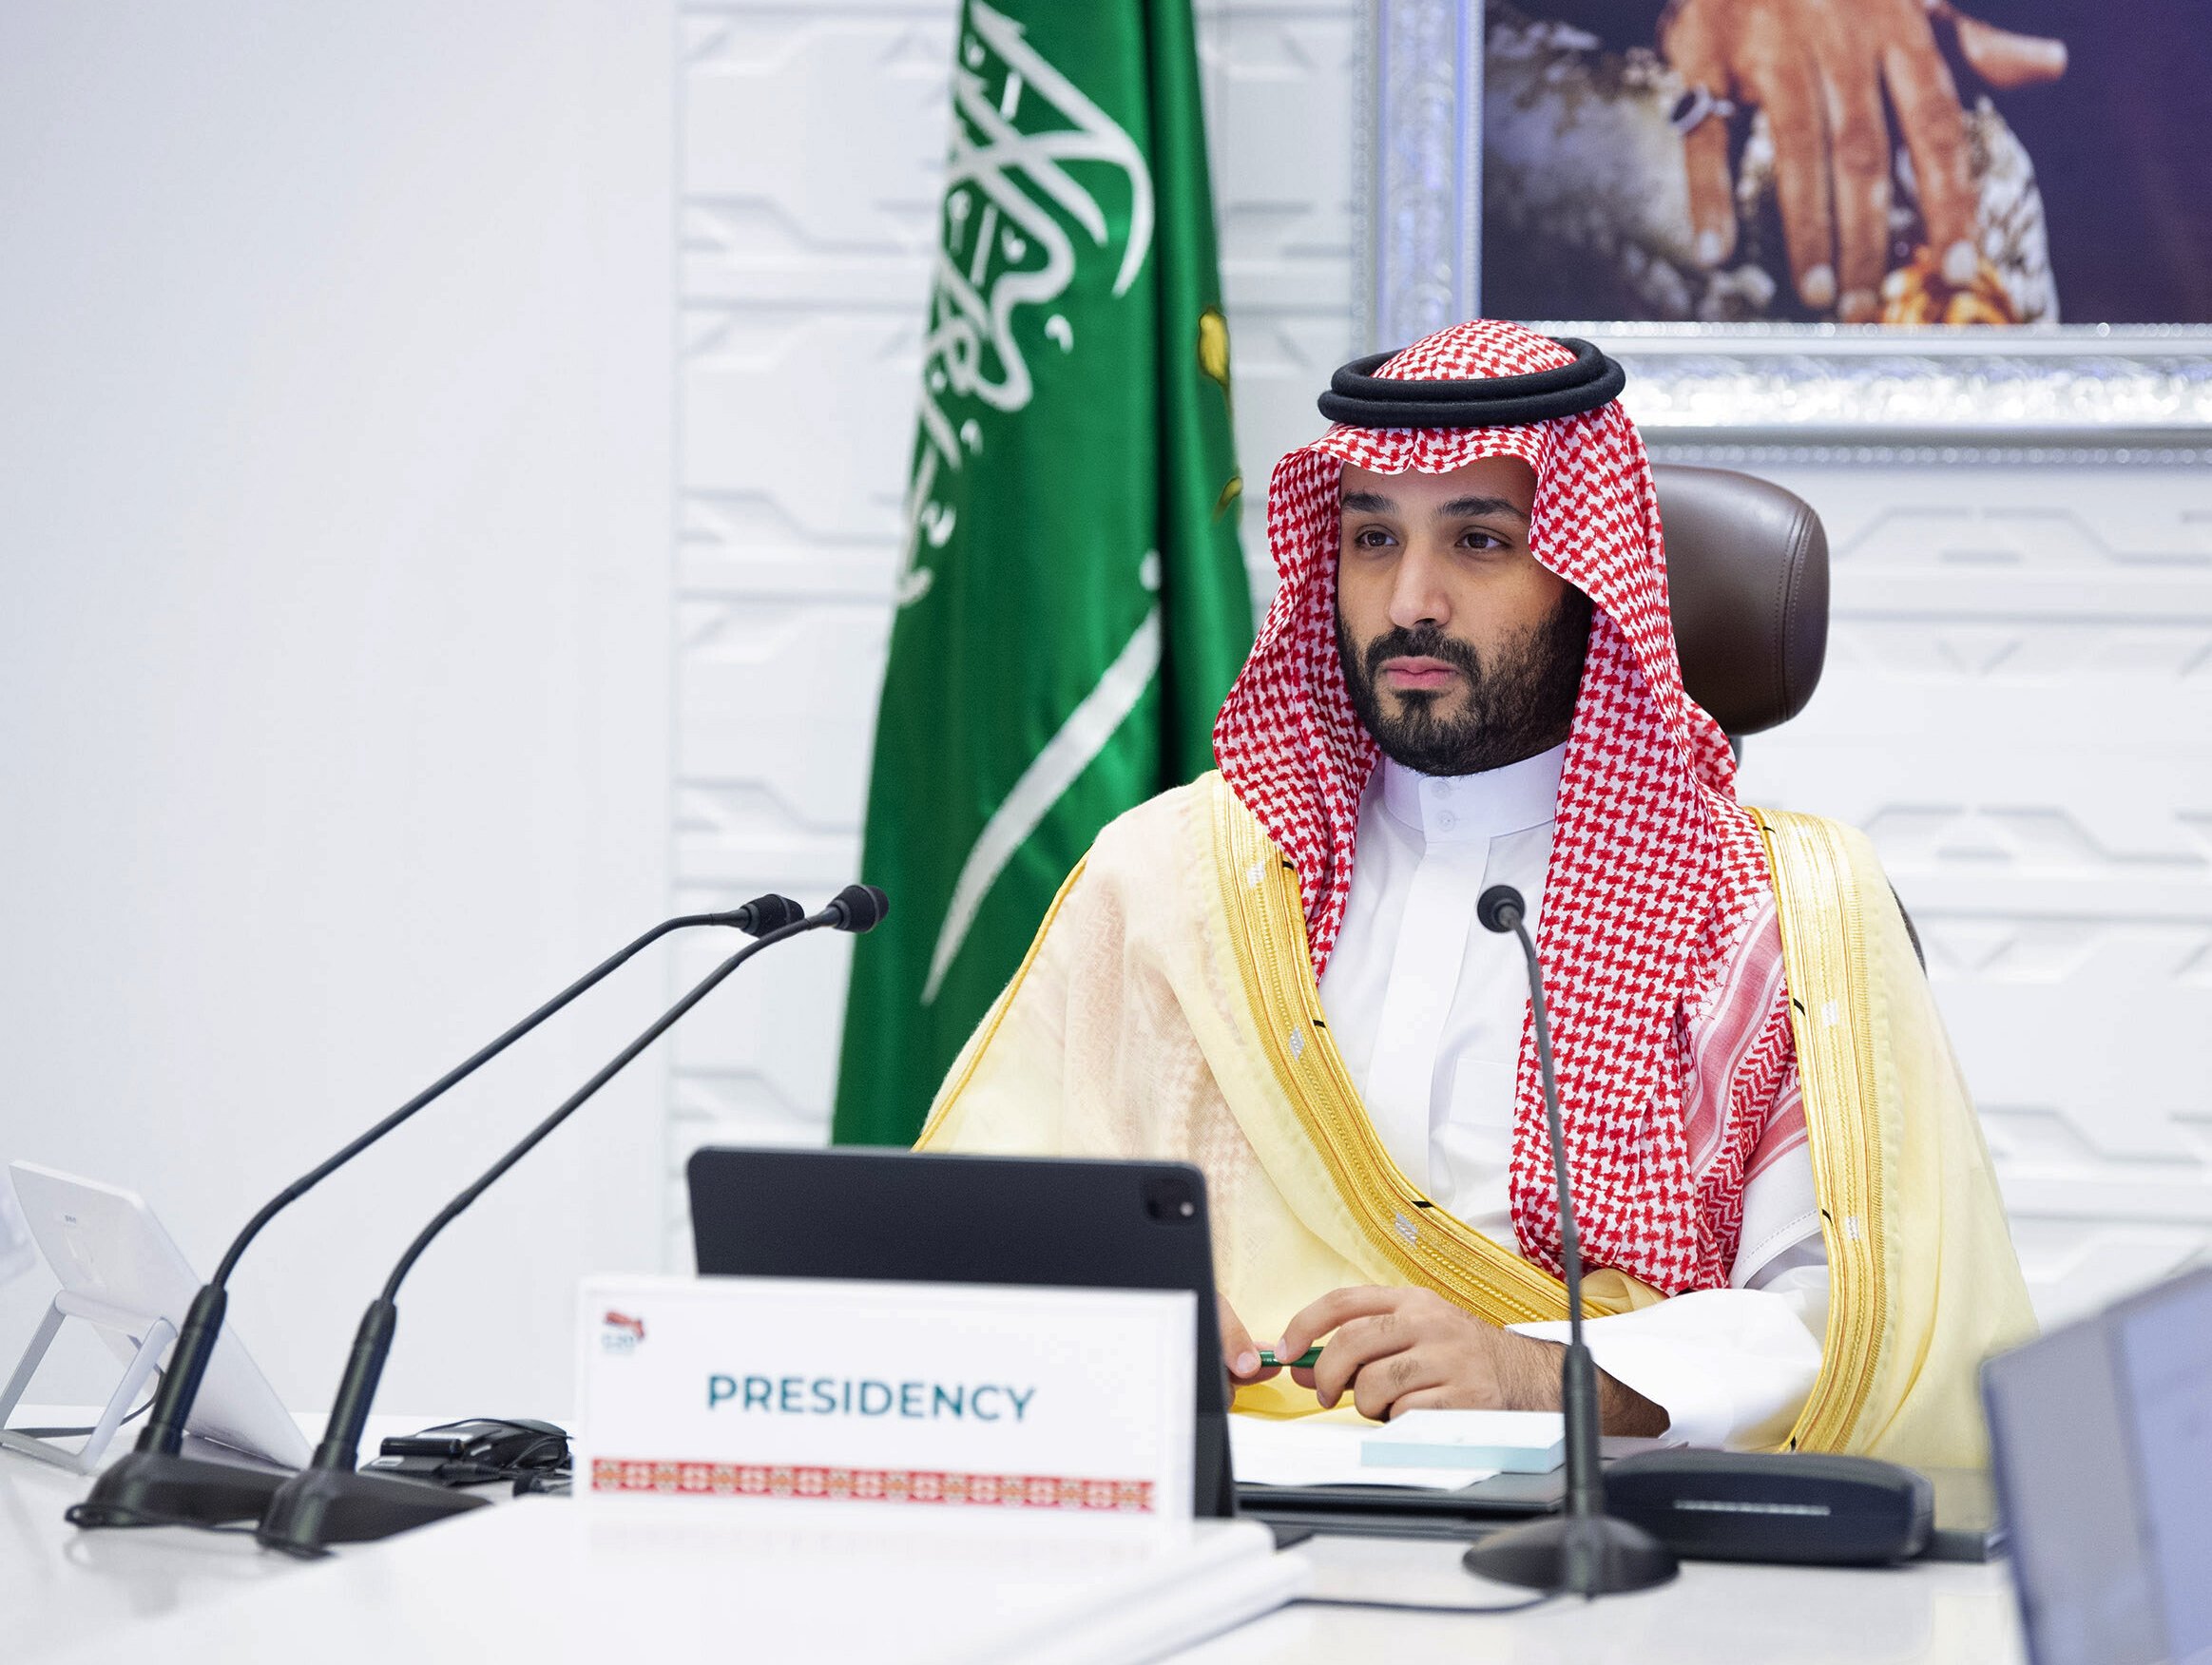 The US involves the Saudi crown prince in the murder of journalists